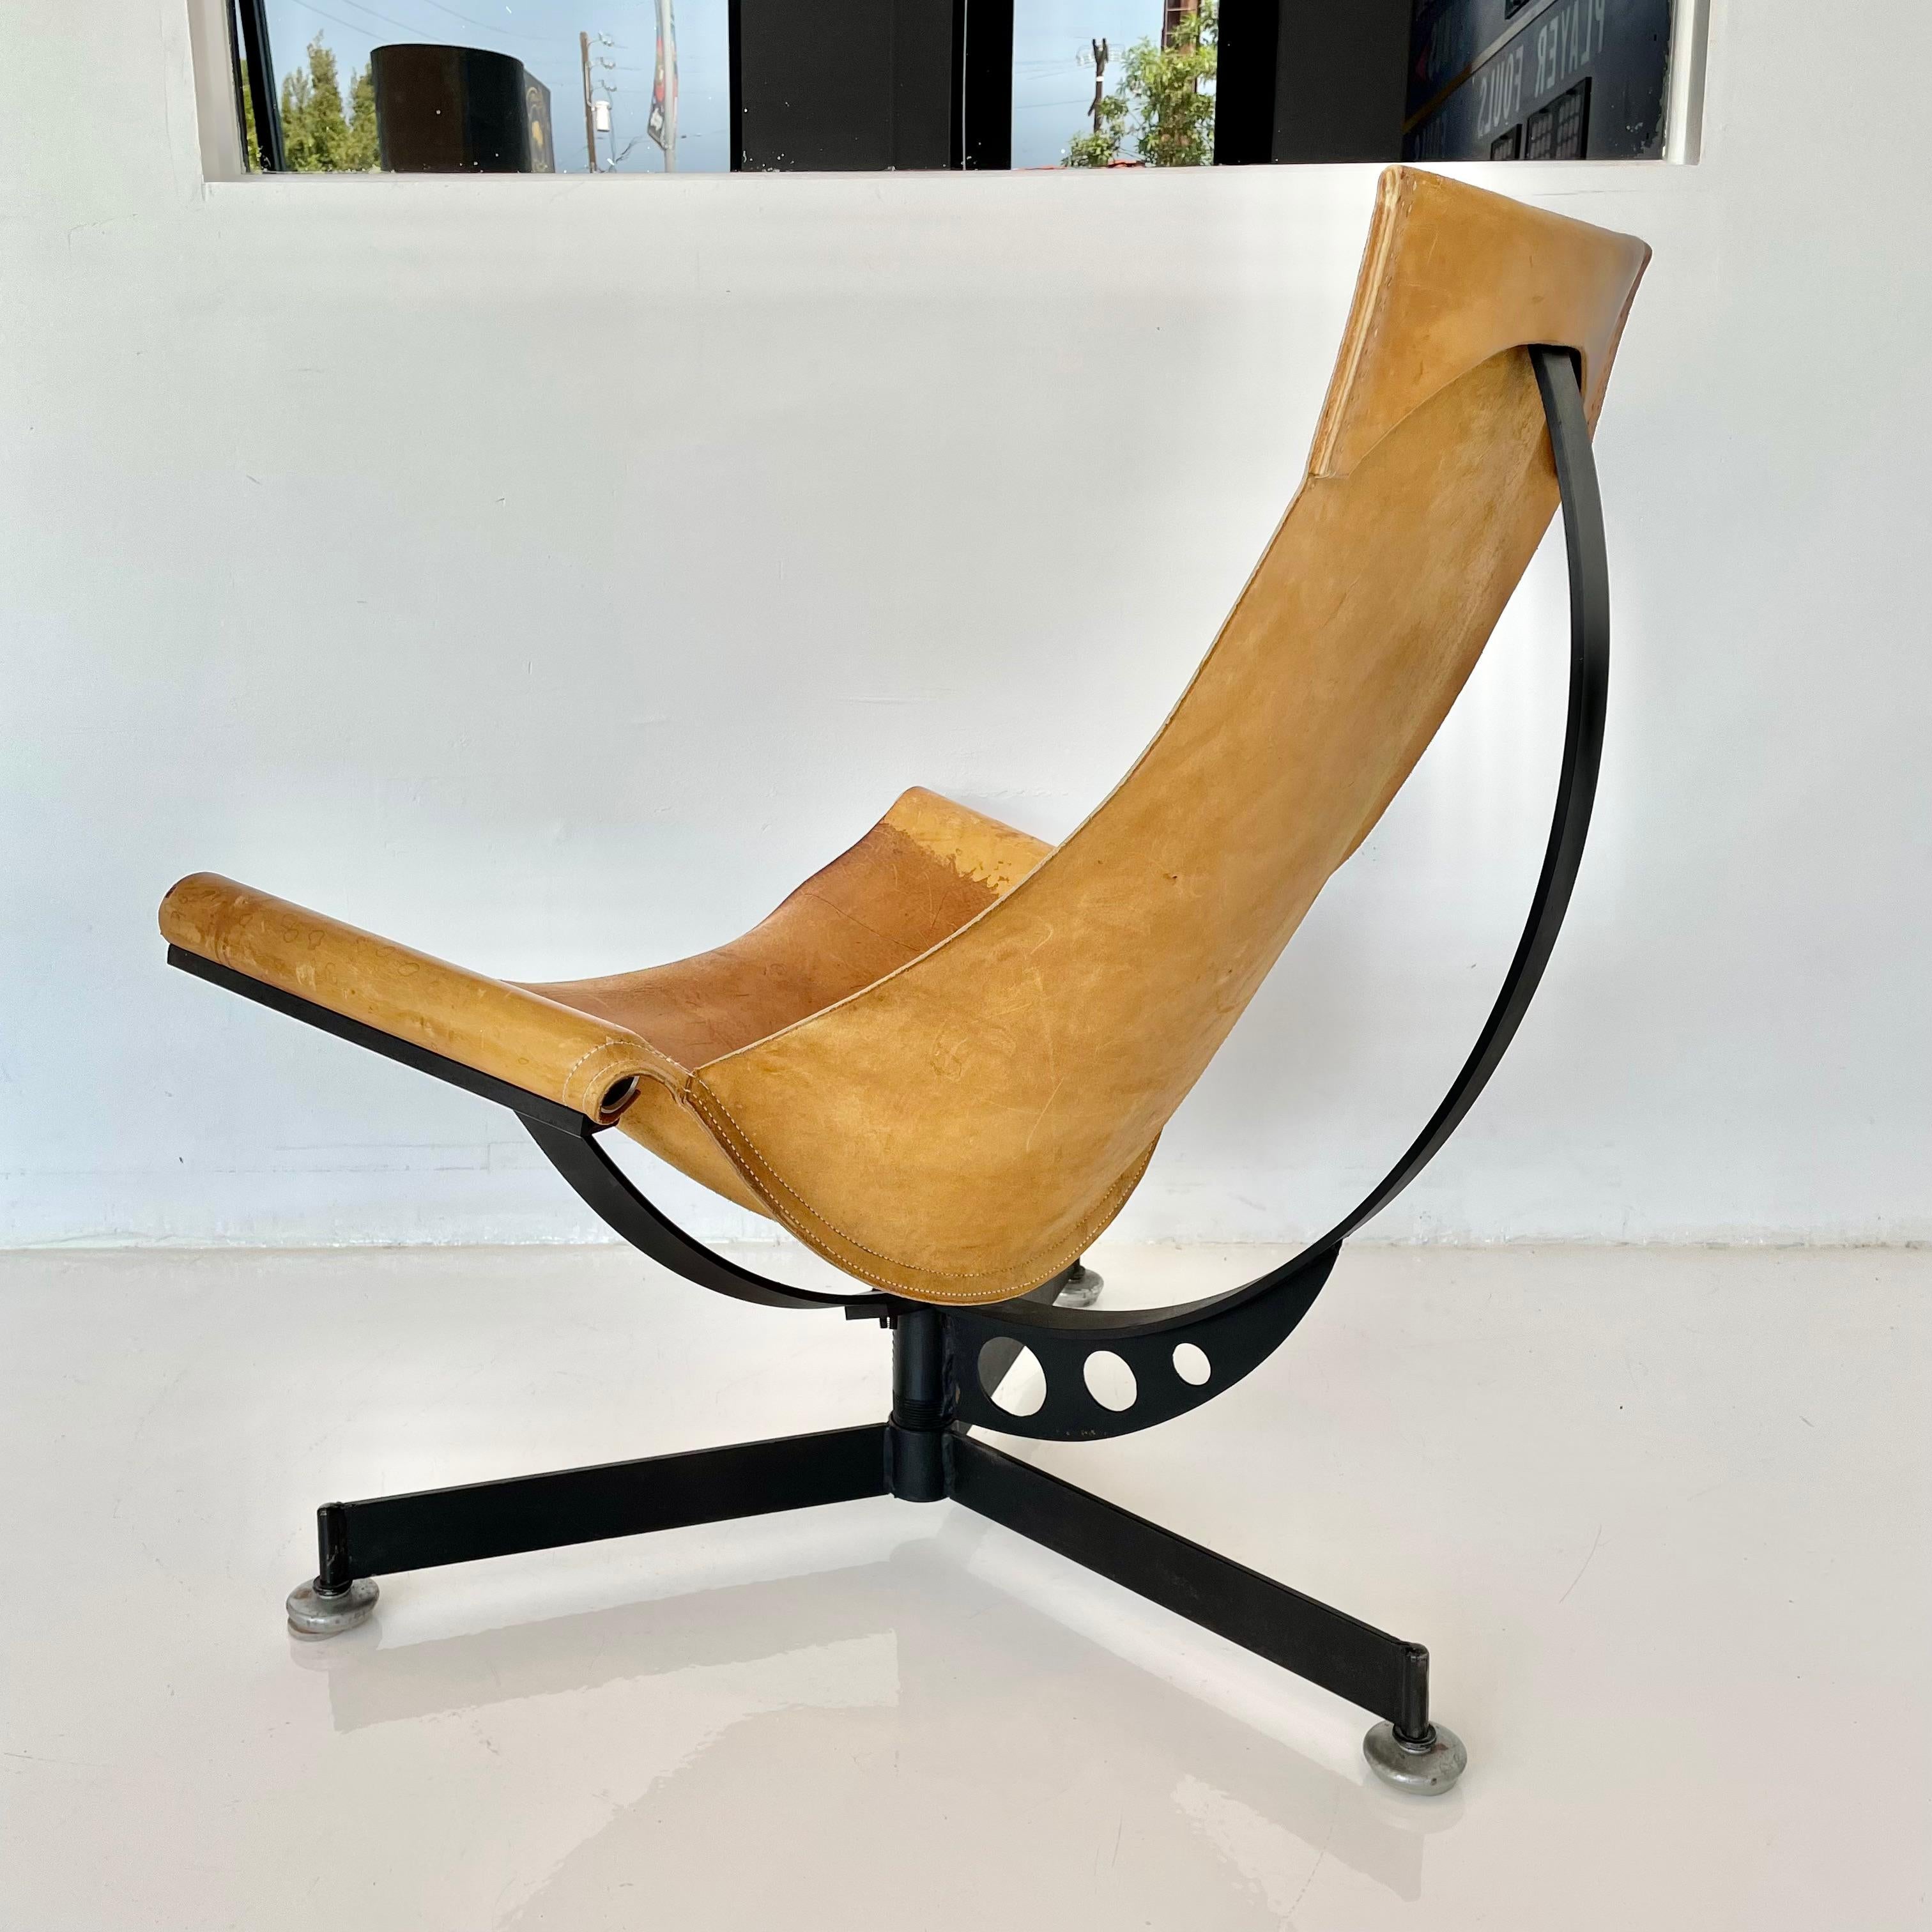 Max Gottschalk Leather and Iron Sling Chair, 1960s For Sale 4